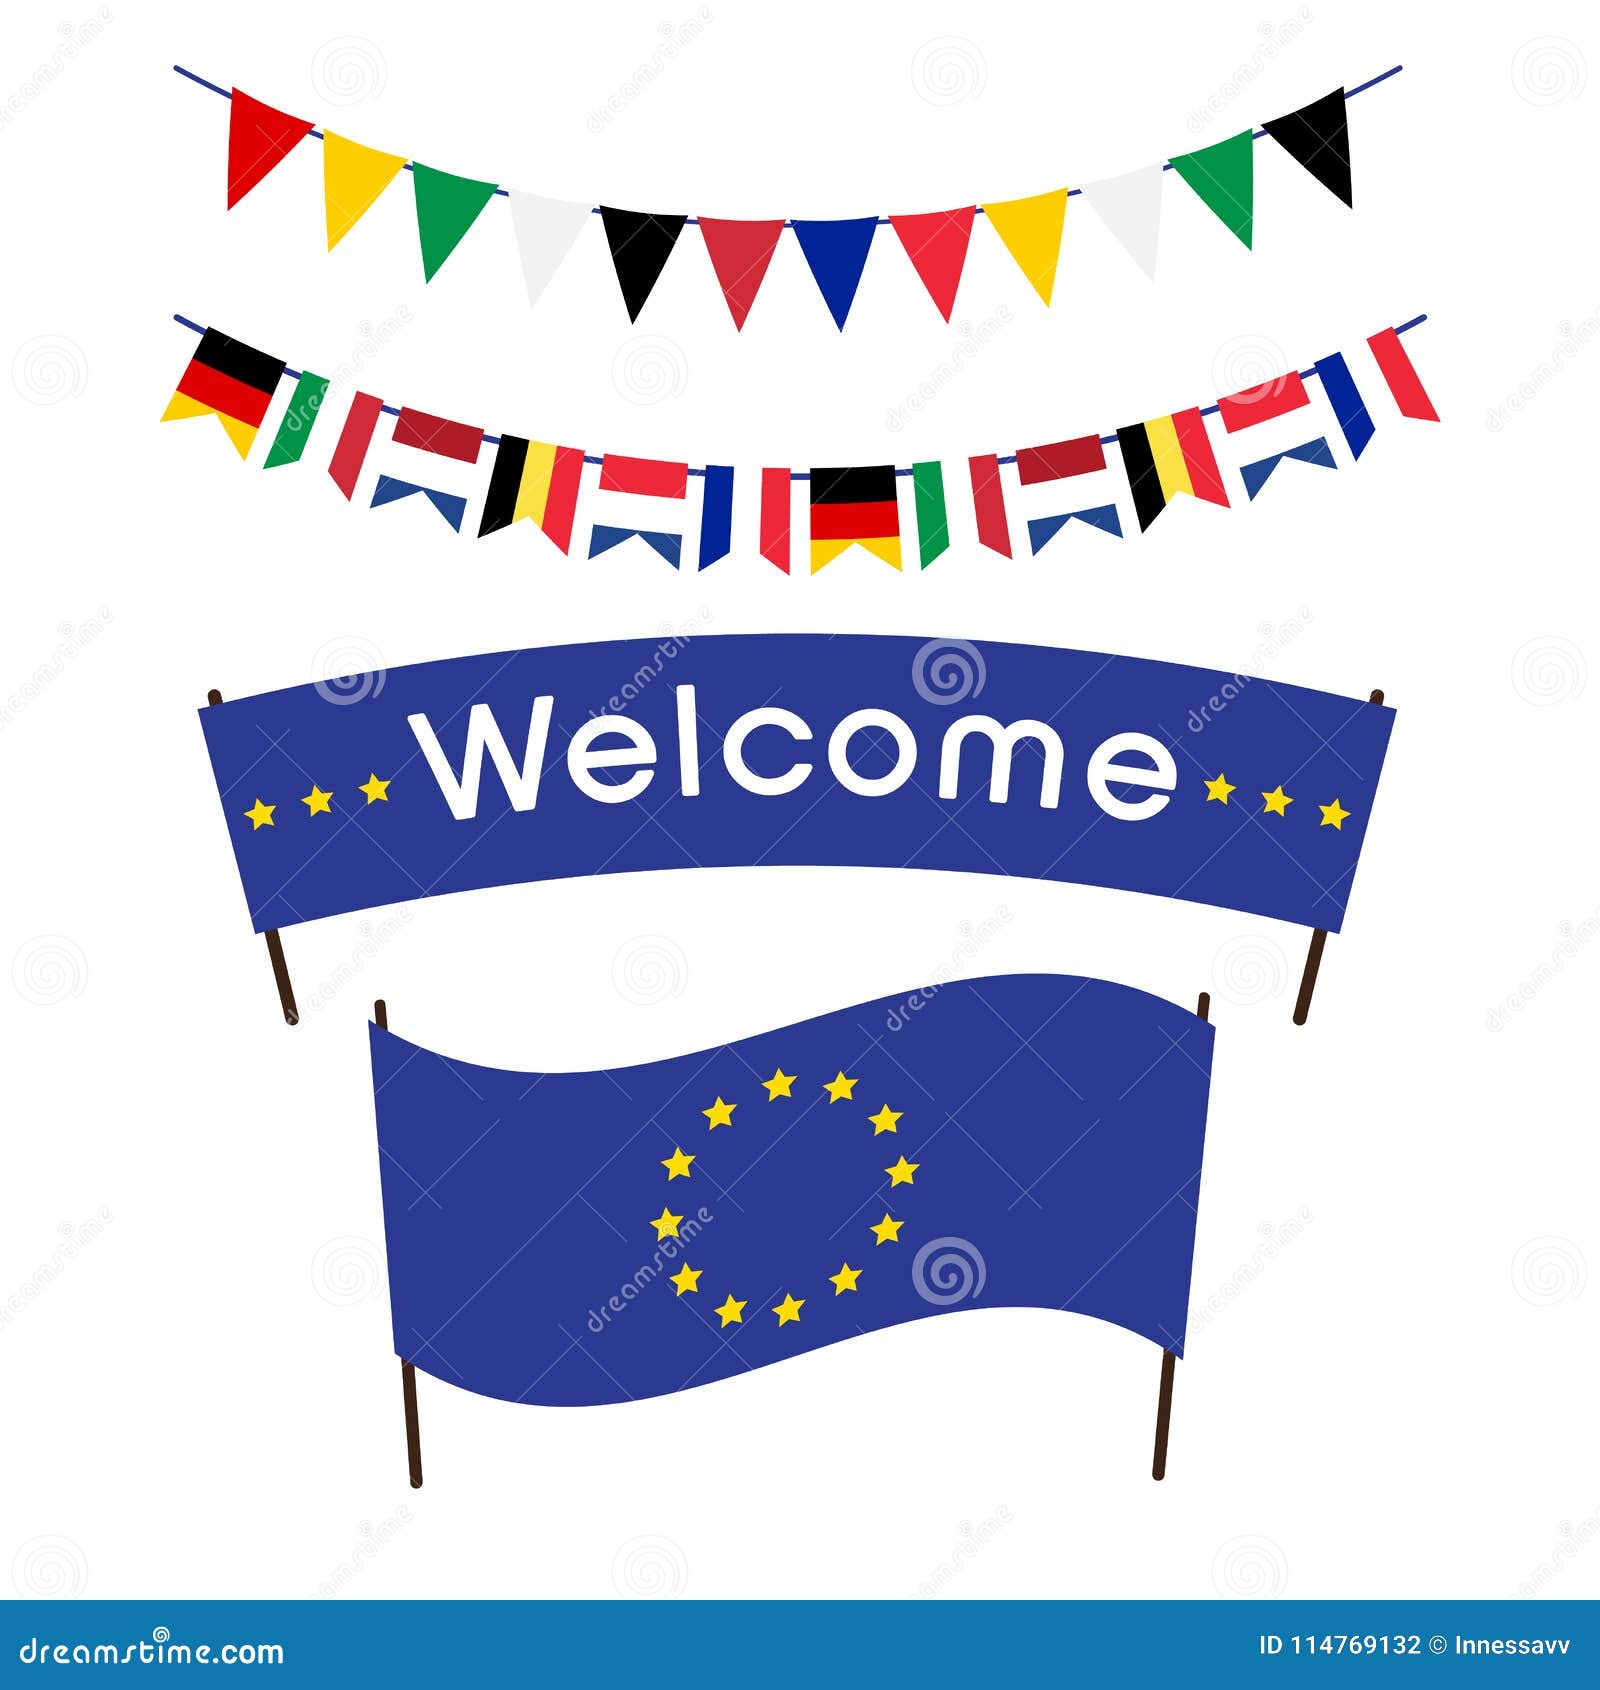 welcome-flag-banner-european-union-festive-flags-colors-national-founding-countries-114769132.jpg